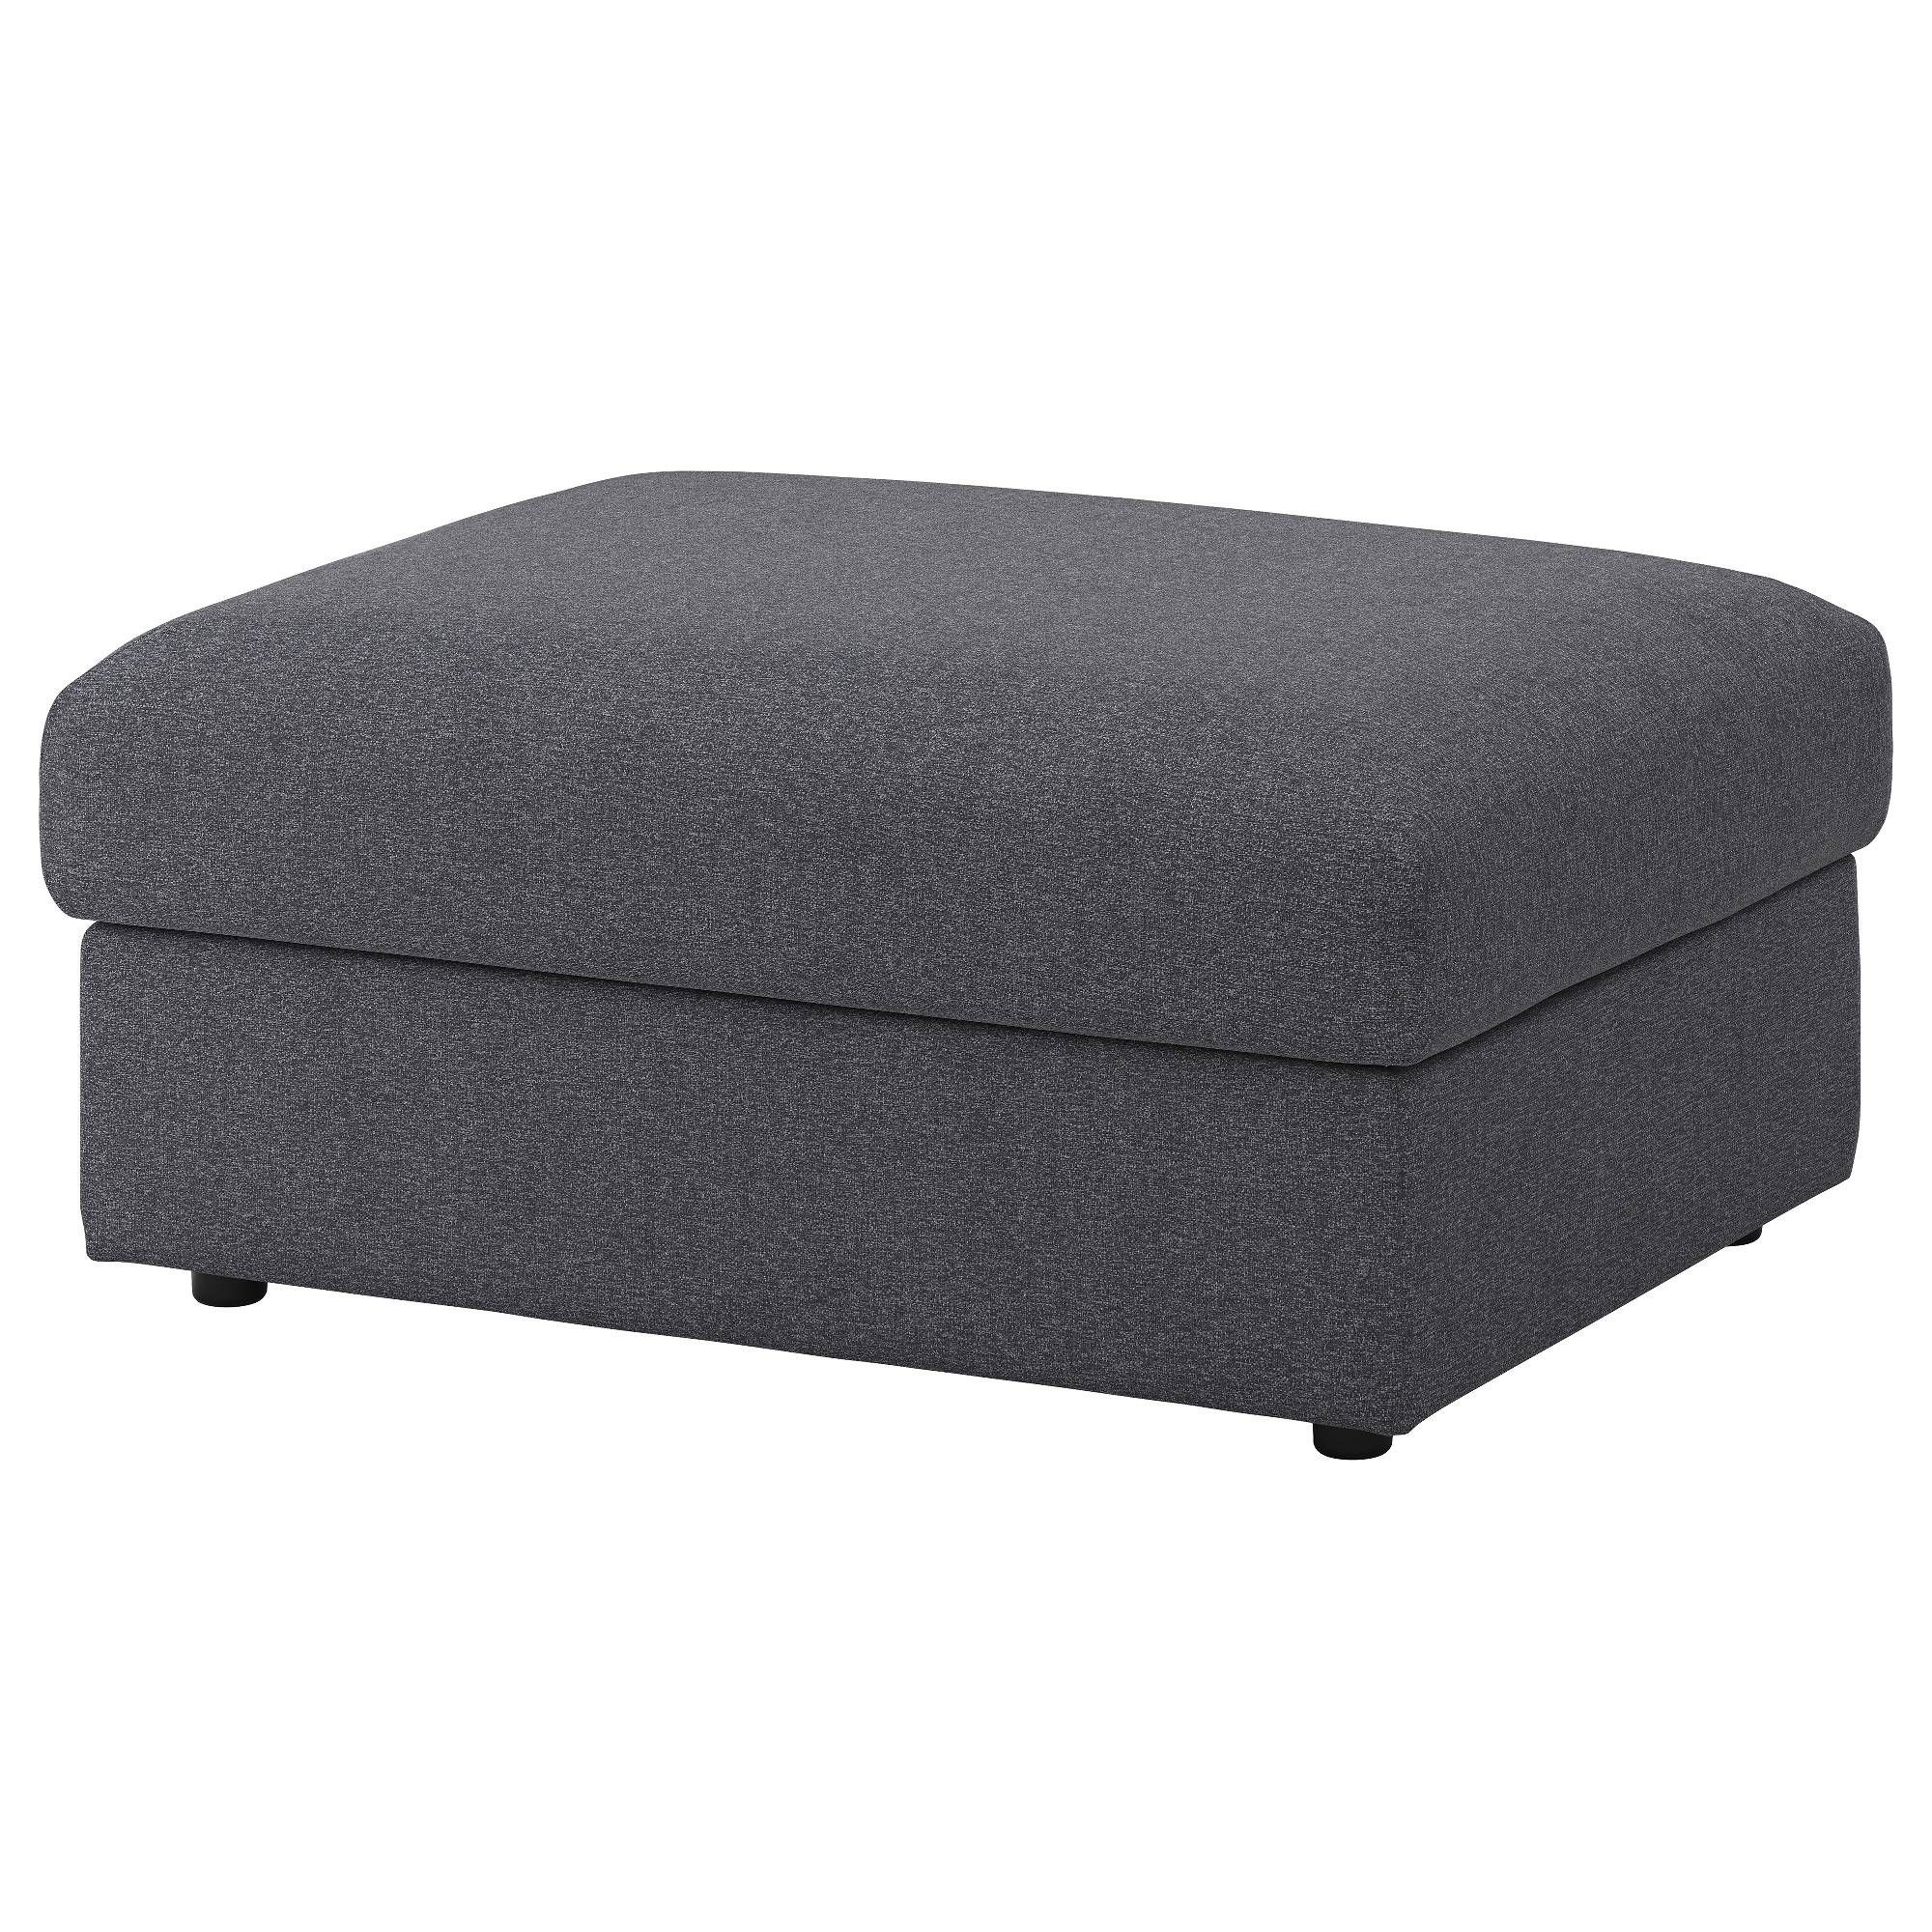 Footstools, Ottomans & Pouffes | Ikea With Regard To Footstools And Pouffes (View 3 of 30)